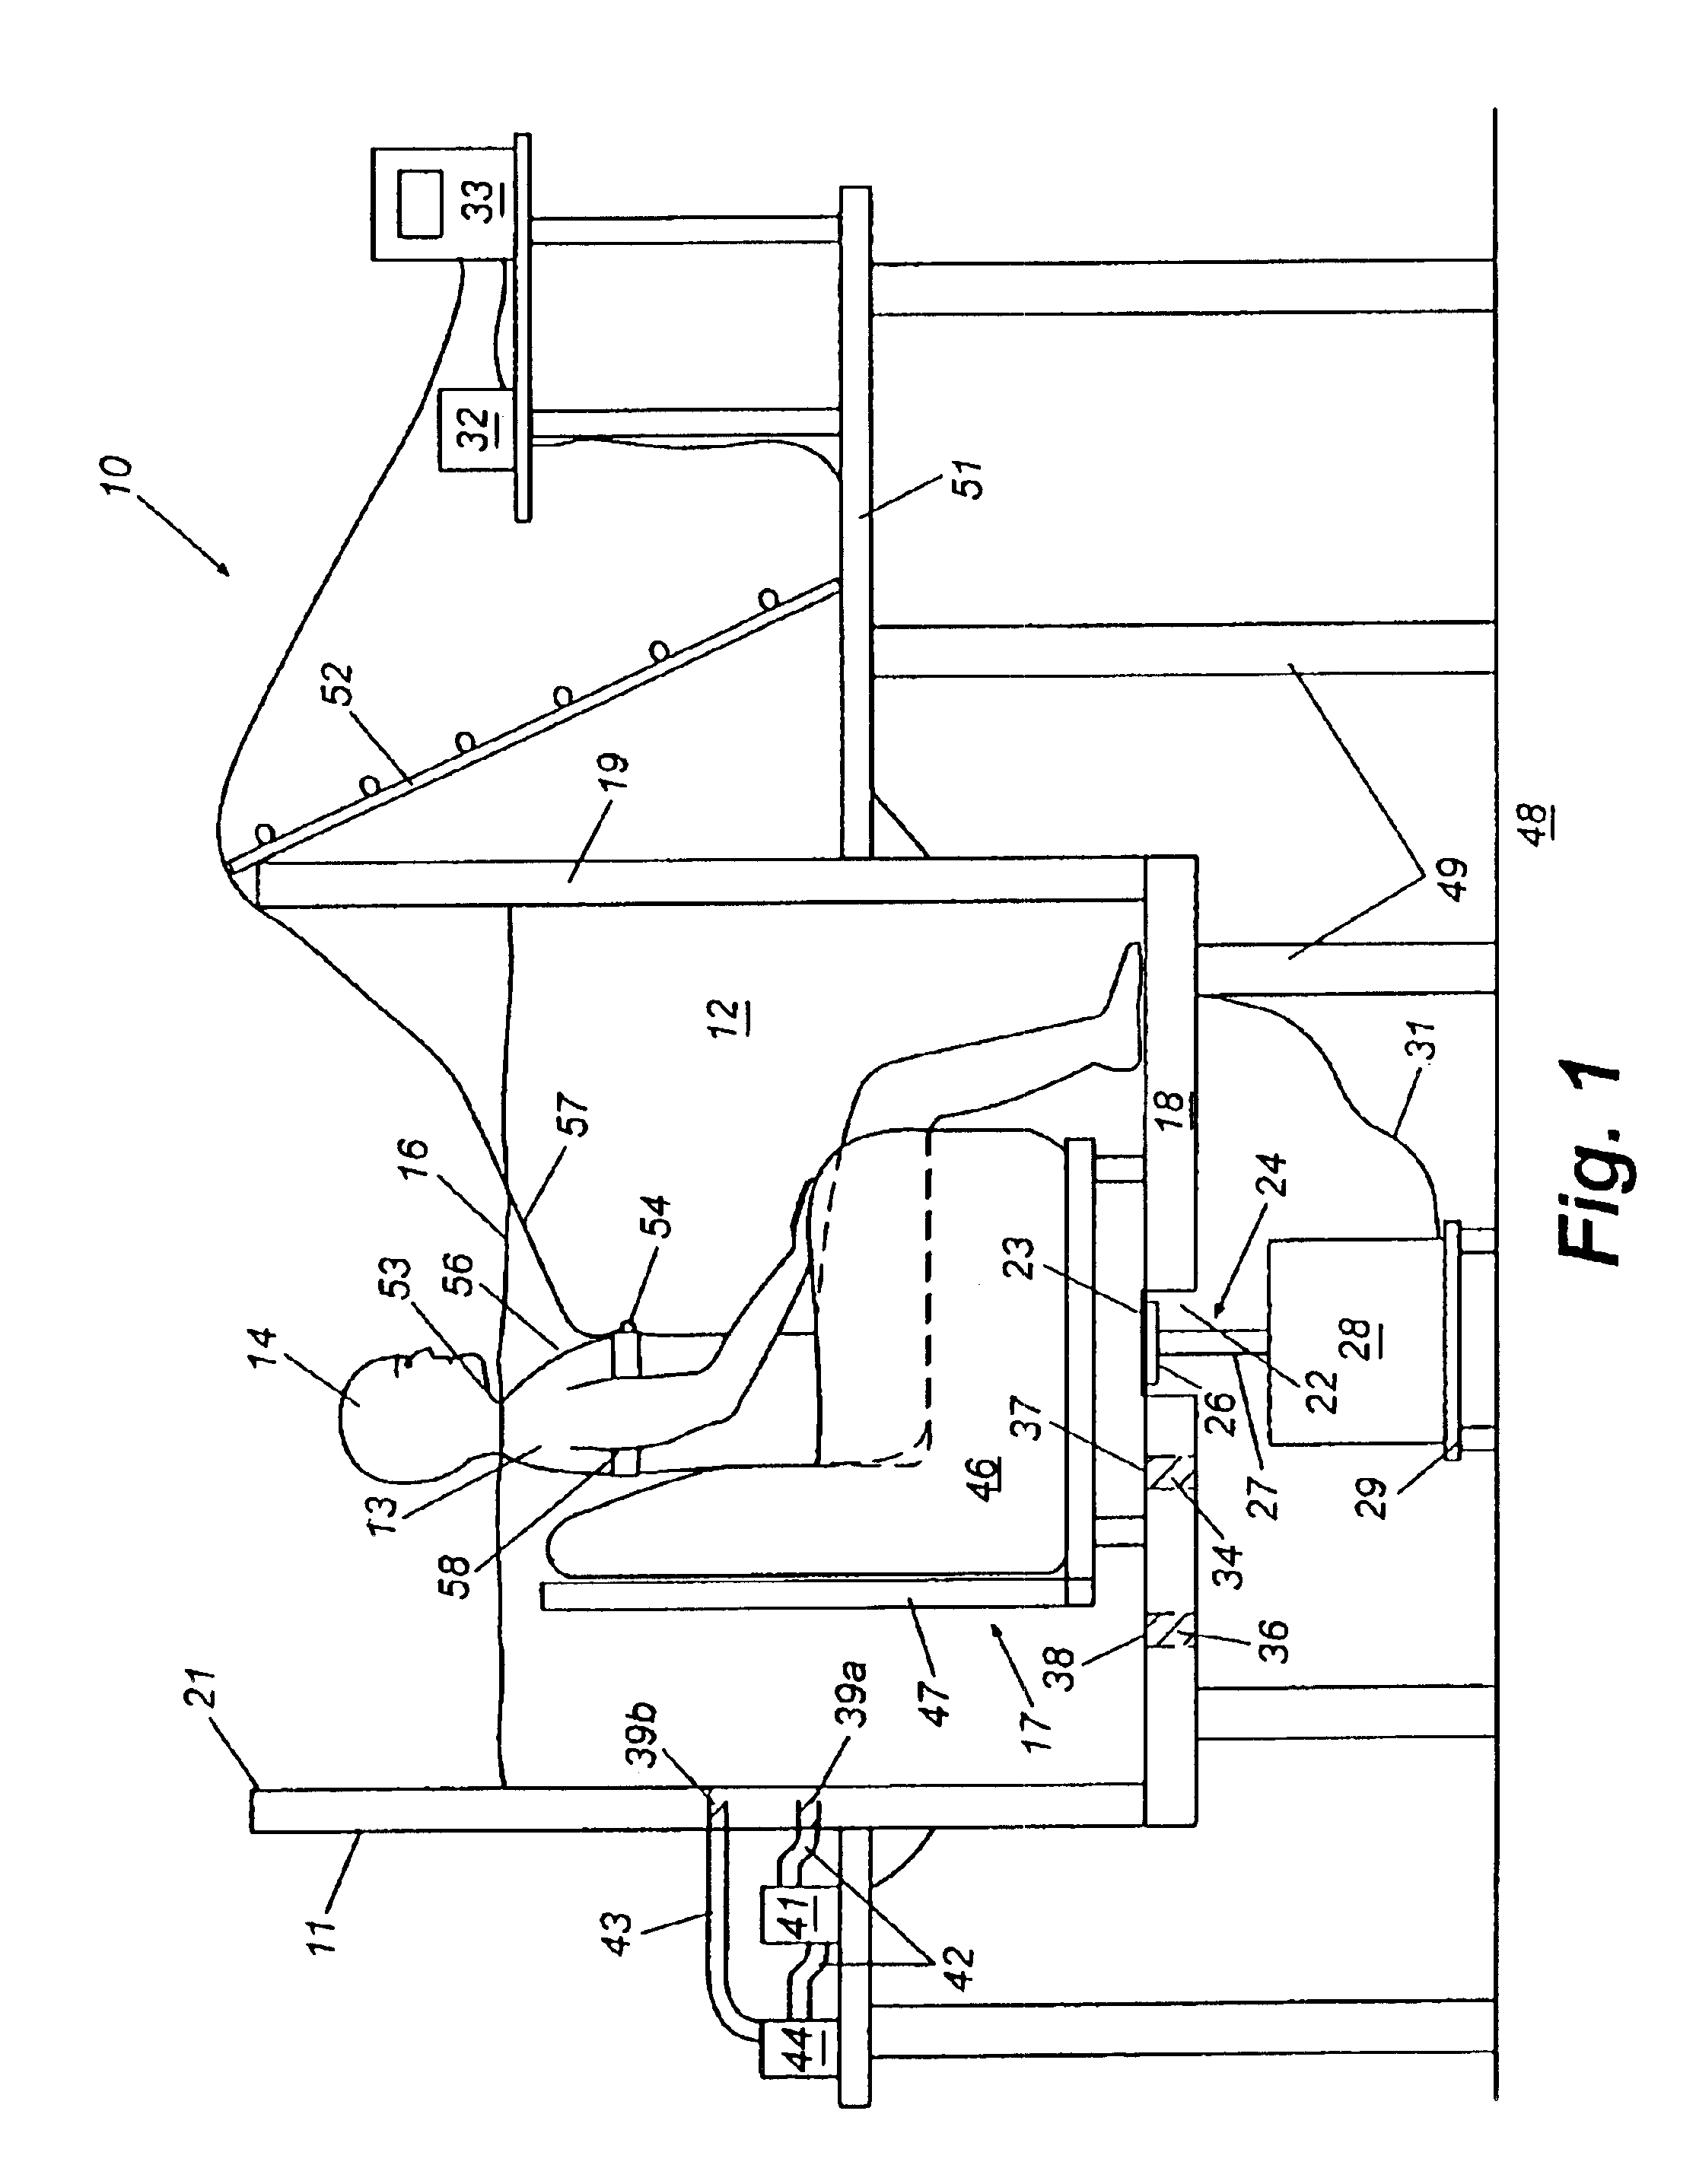 Apparatus and method for implementing hydro-acoustic therapy for the lungs